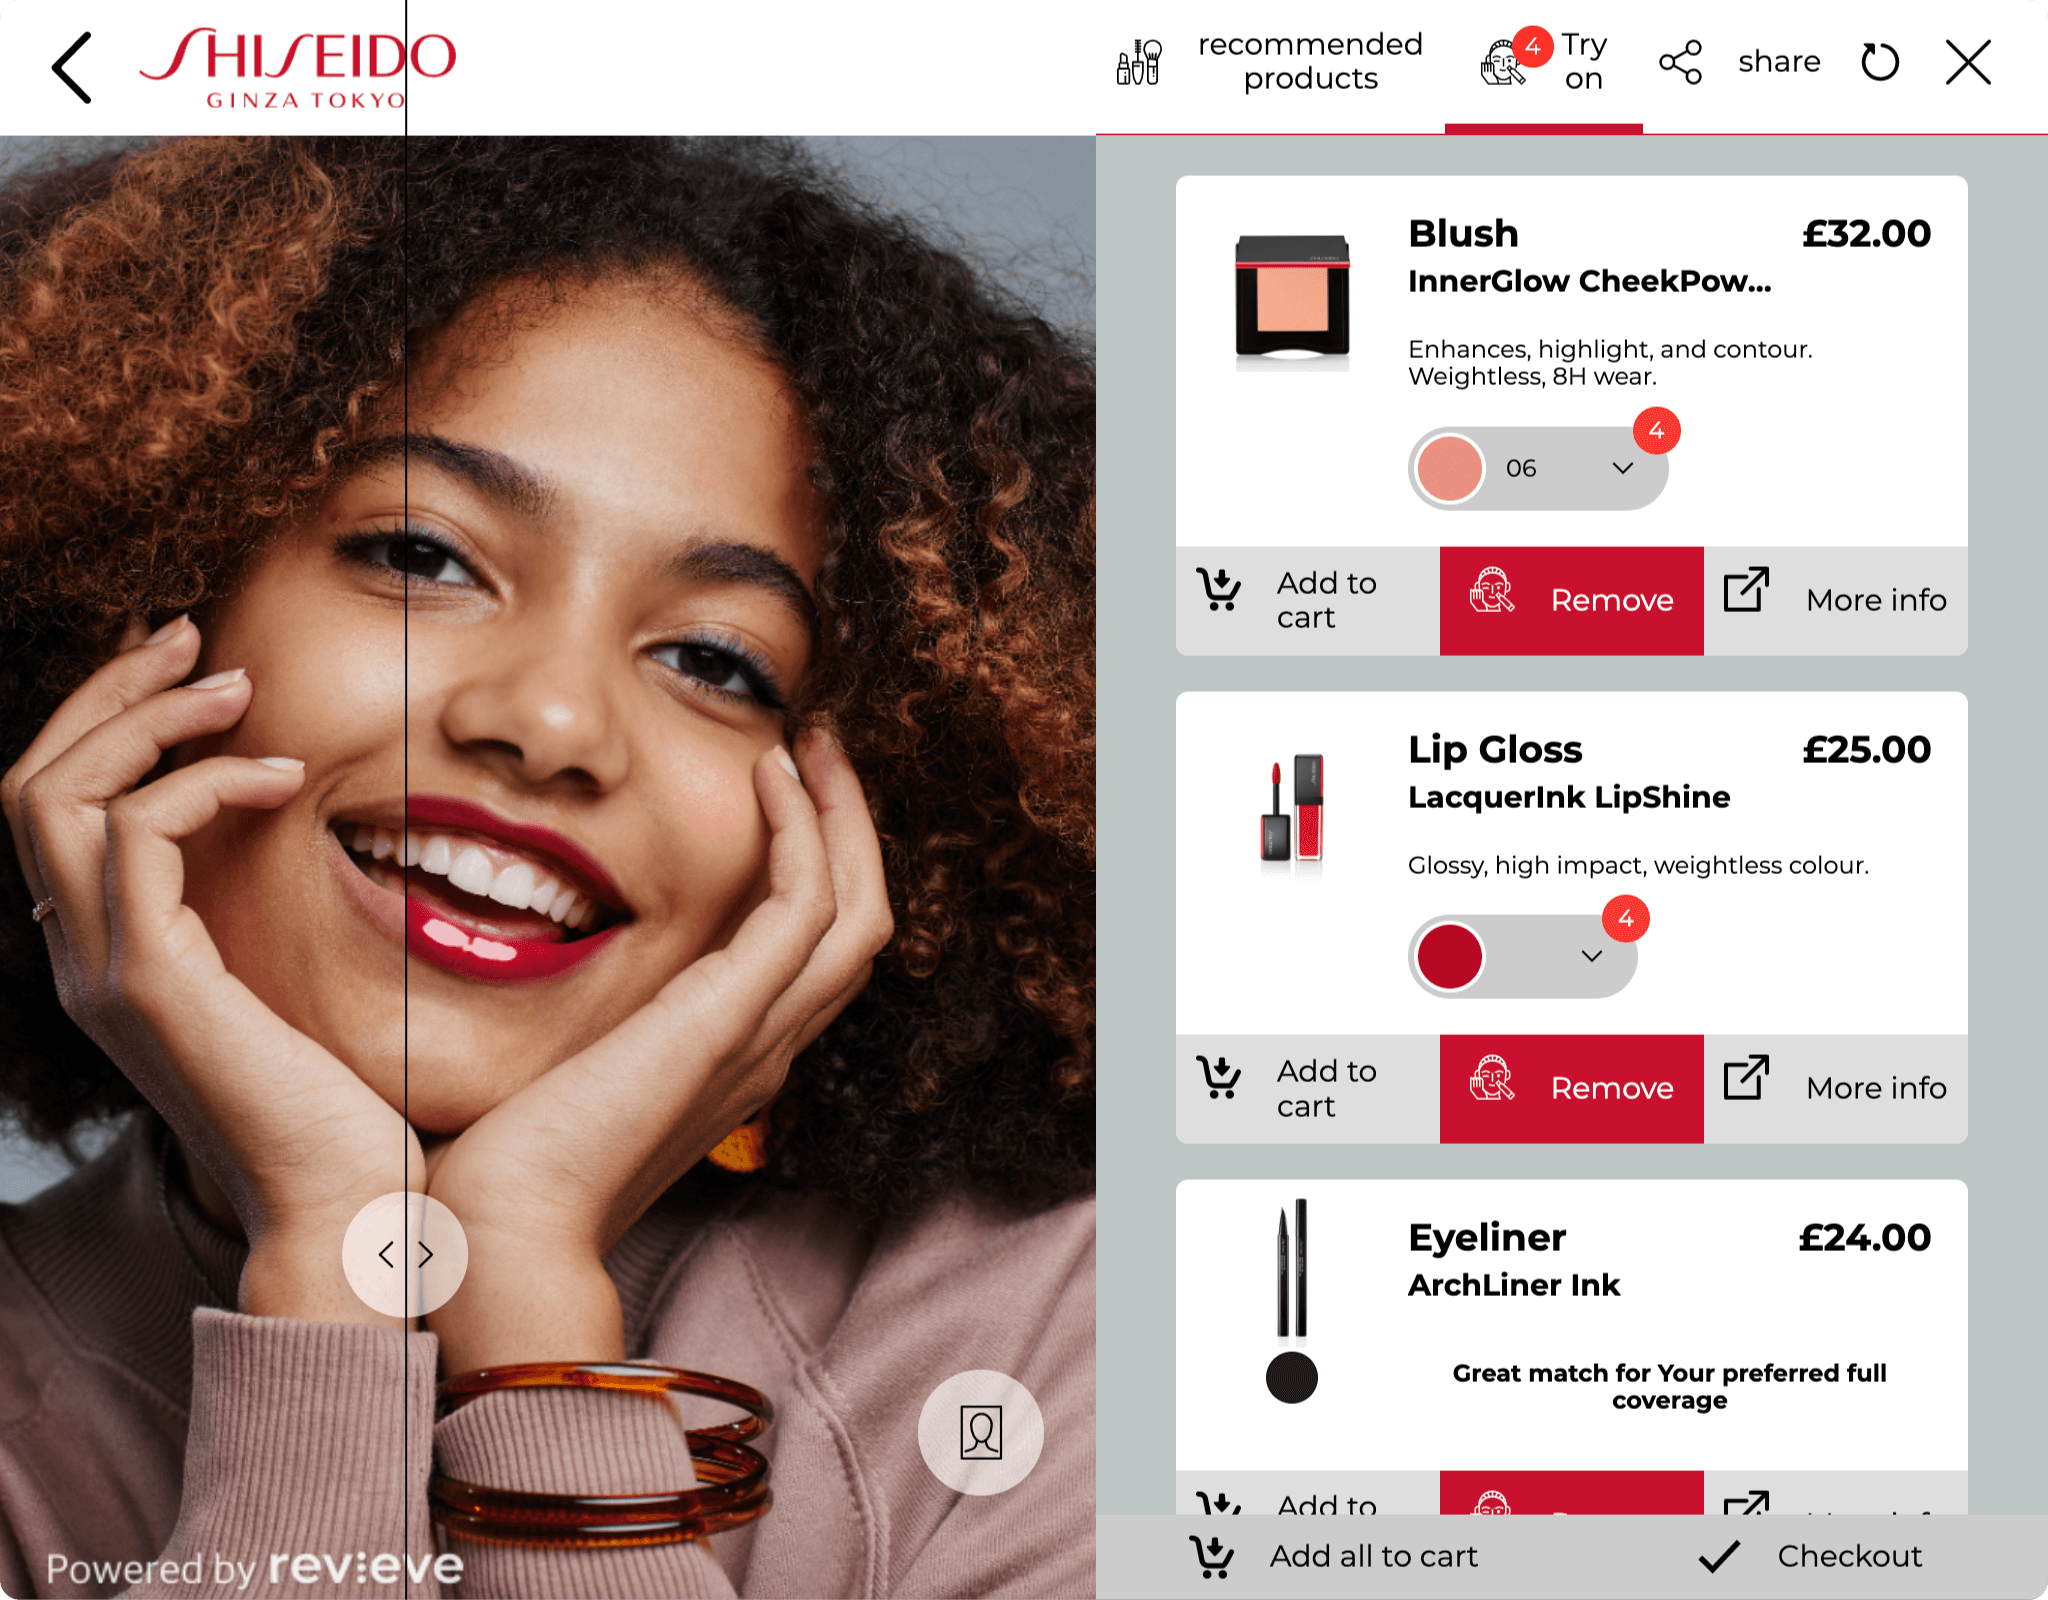 Revieve And Shiseido Partner To Launch